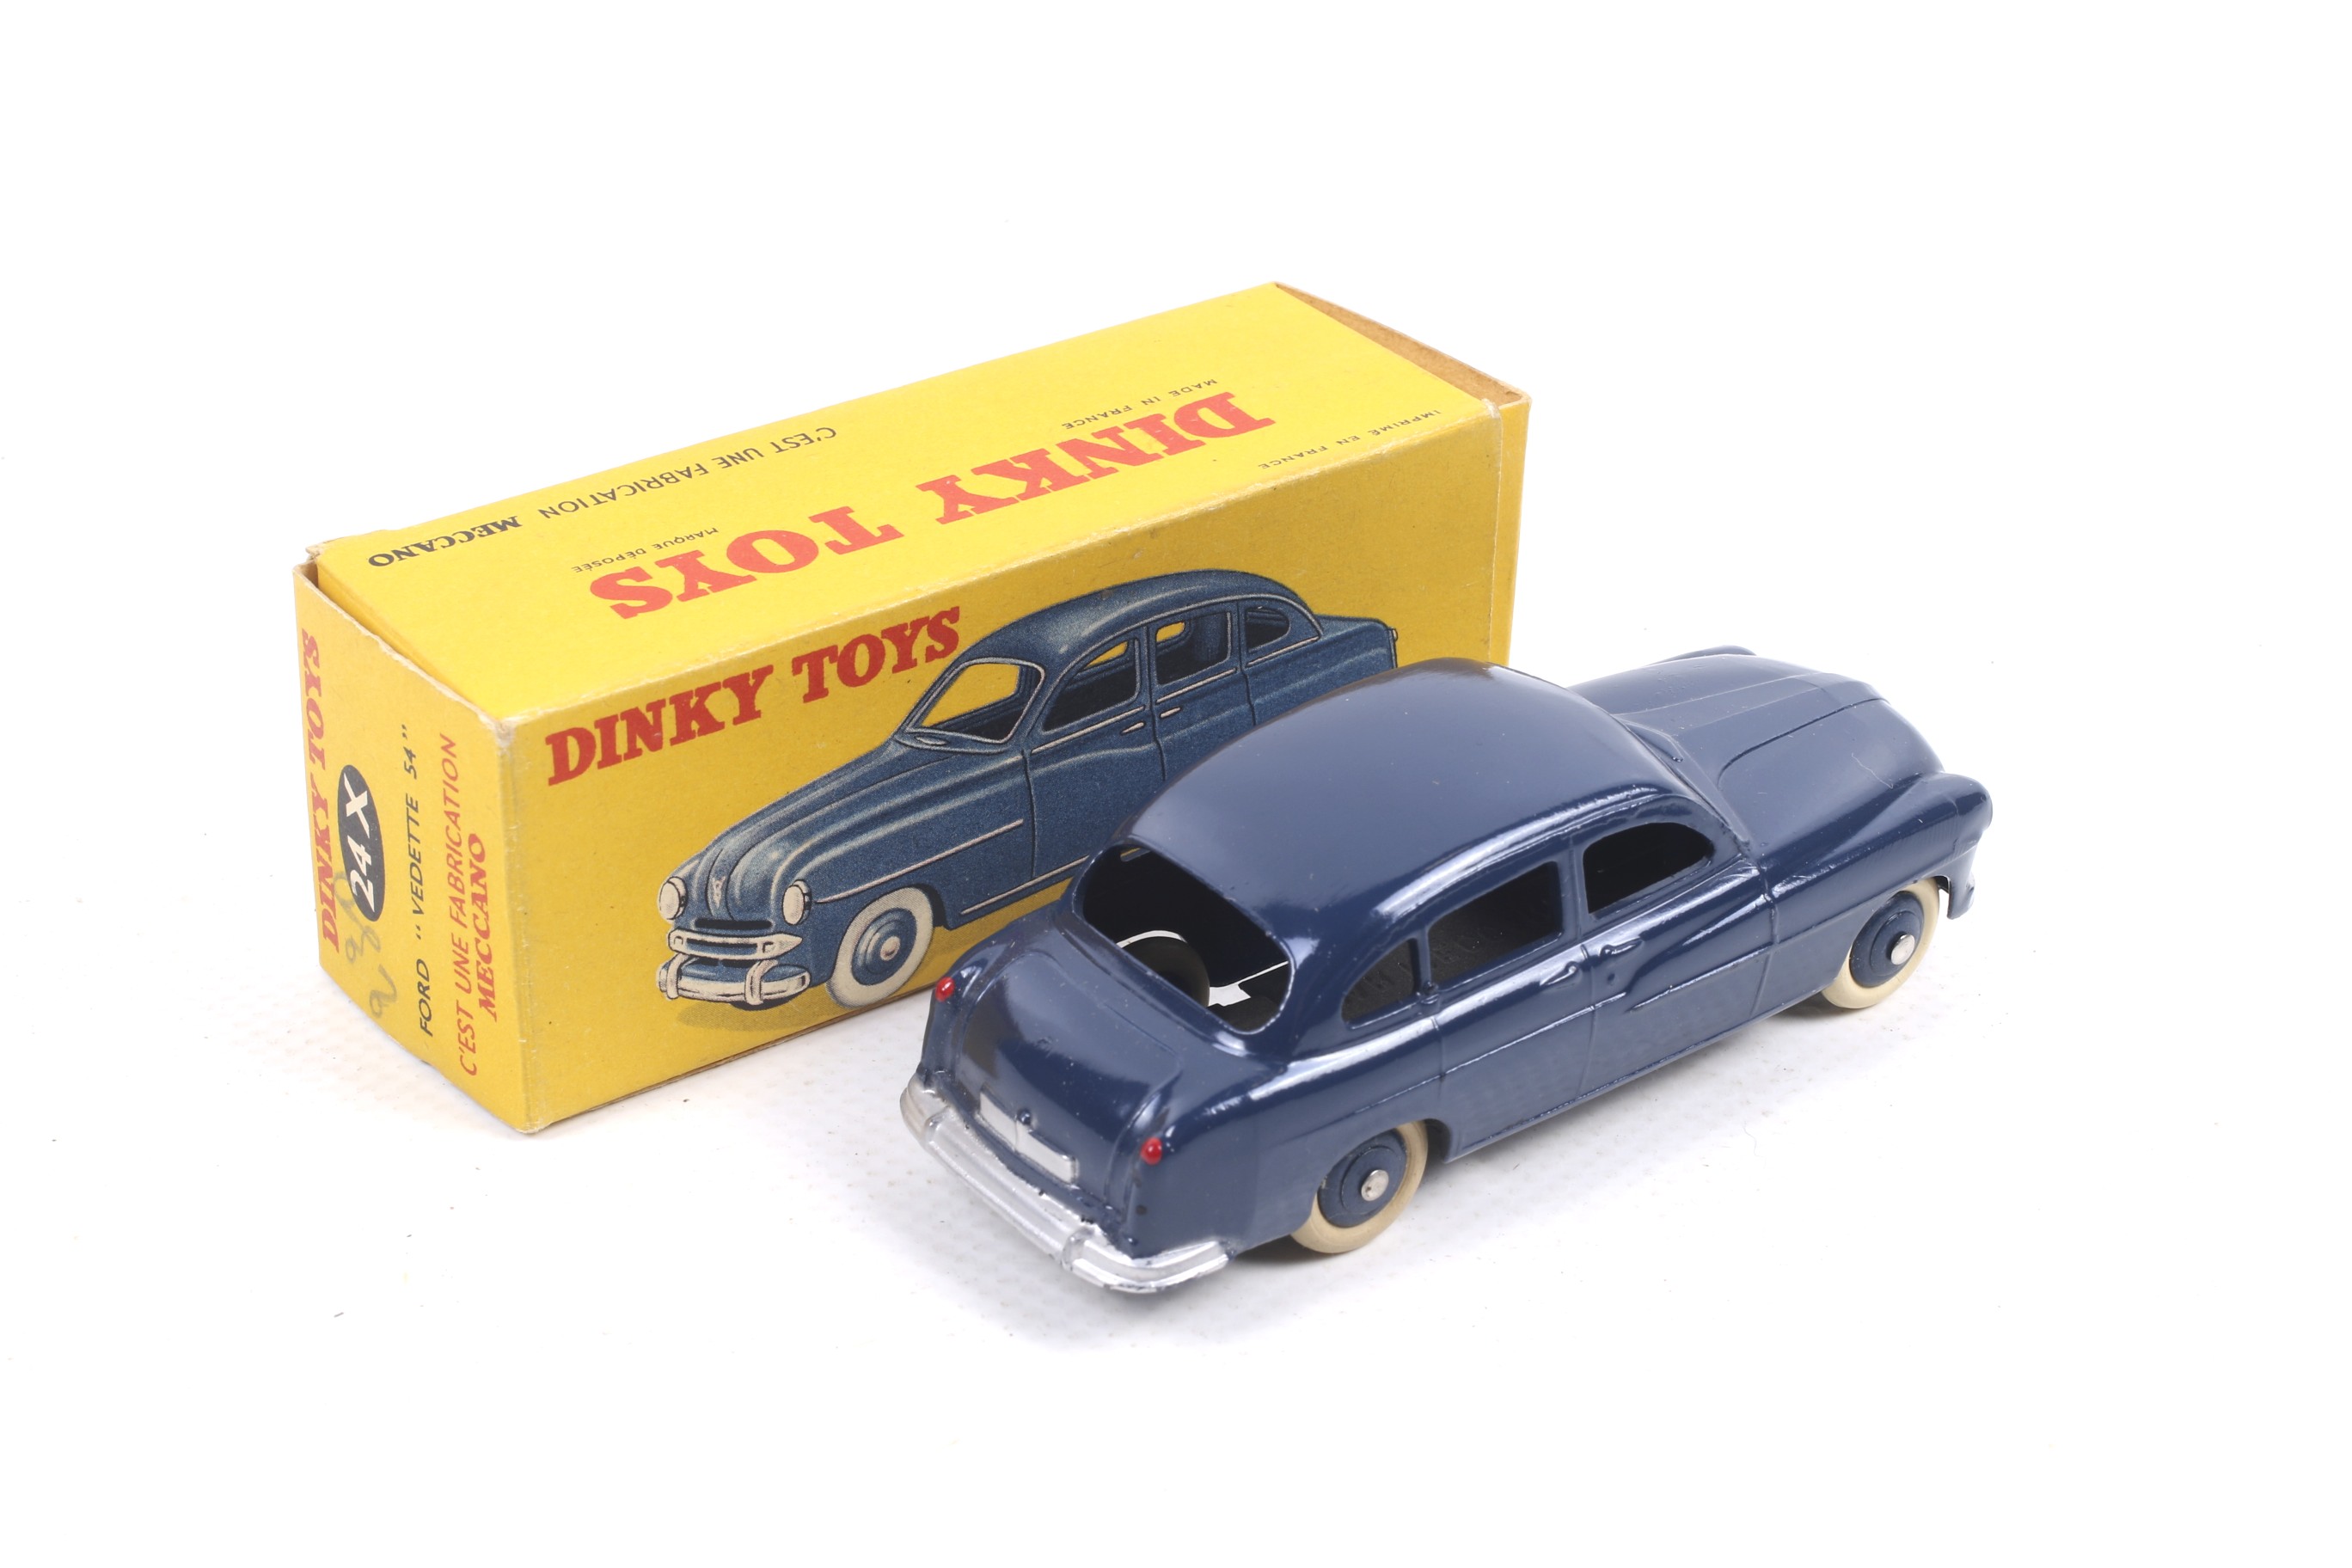 A Dinky diecast Ford Vadette 54. No. 24x, with blue body and white wheels, in original box. - Image 2 of 2